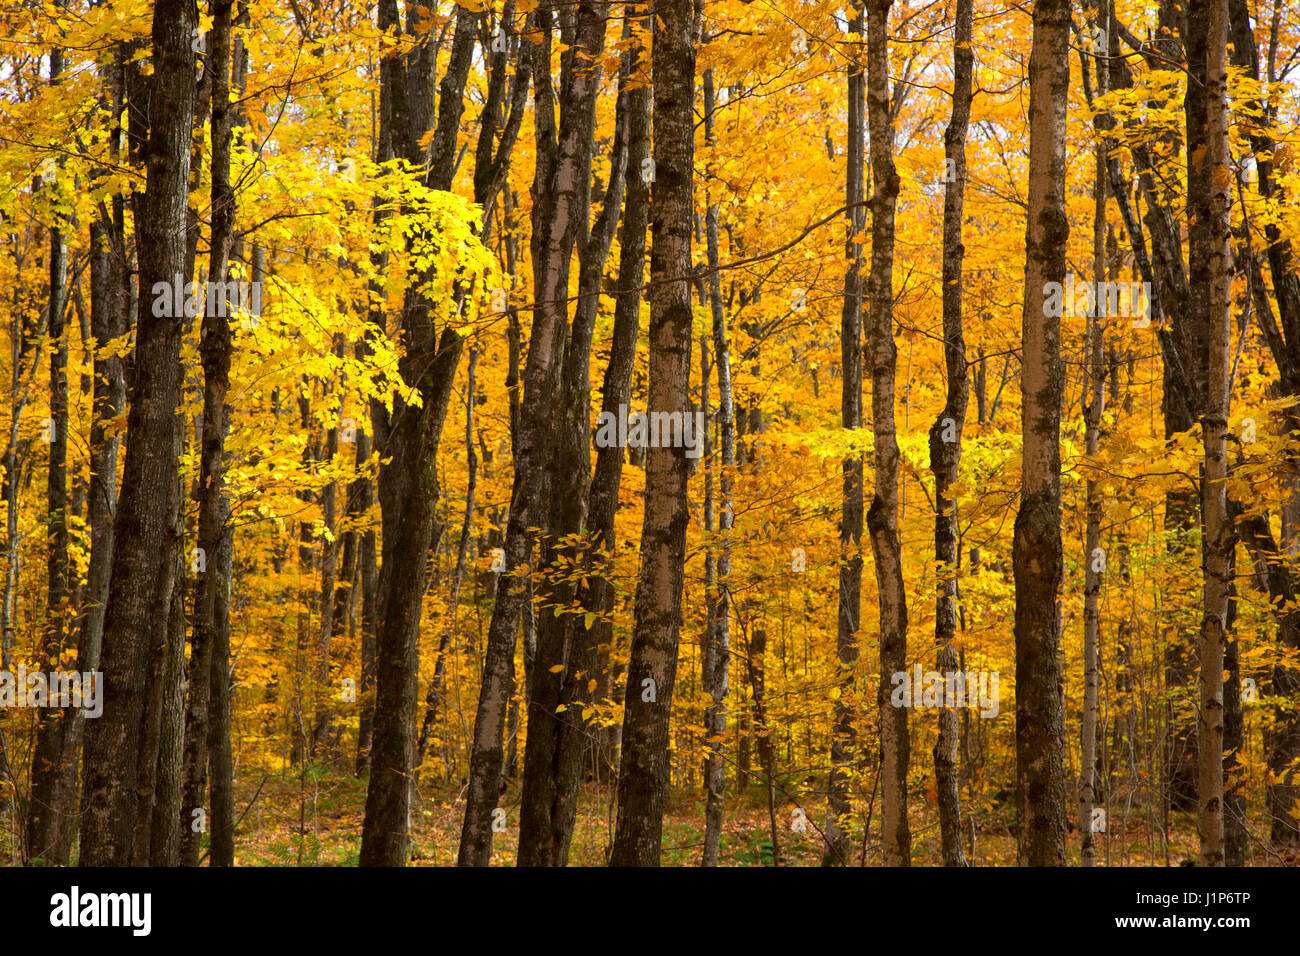 Hardwood forest in autumn, Chequamegon-Nicolet National Forest, Wisconsin Stock Photo